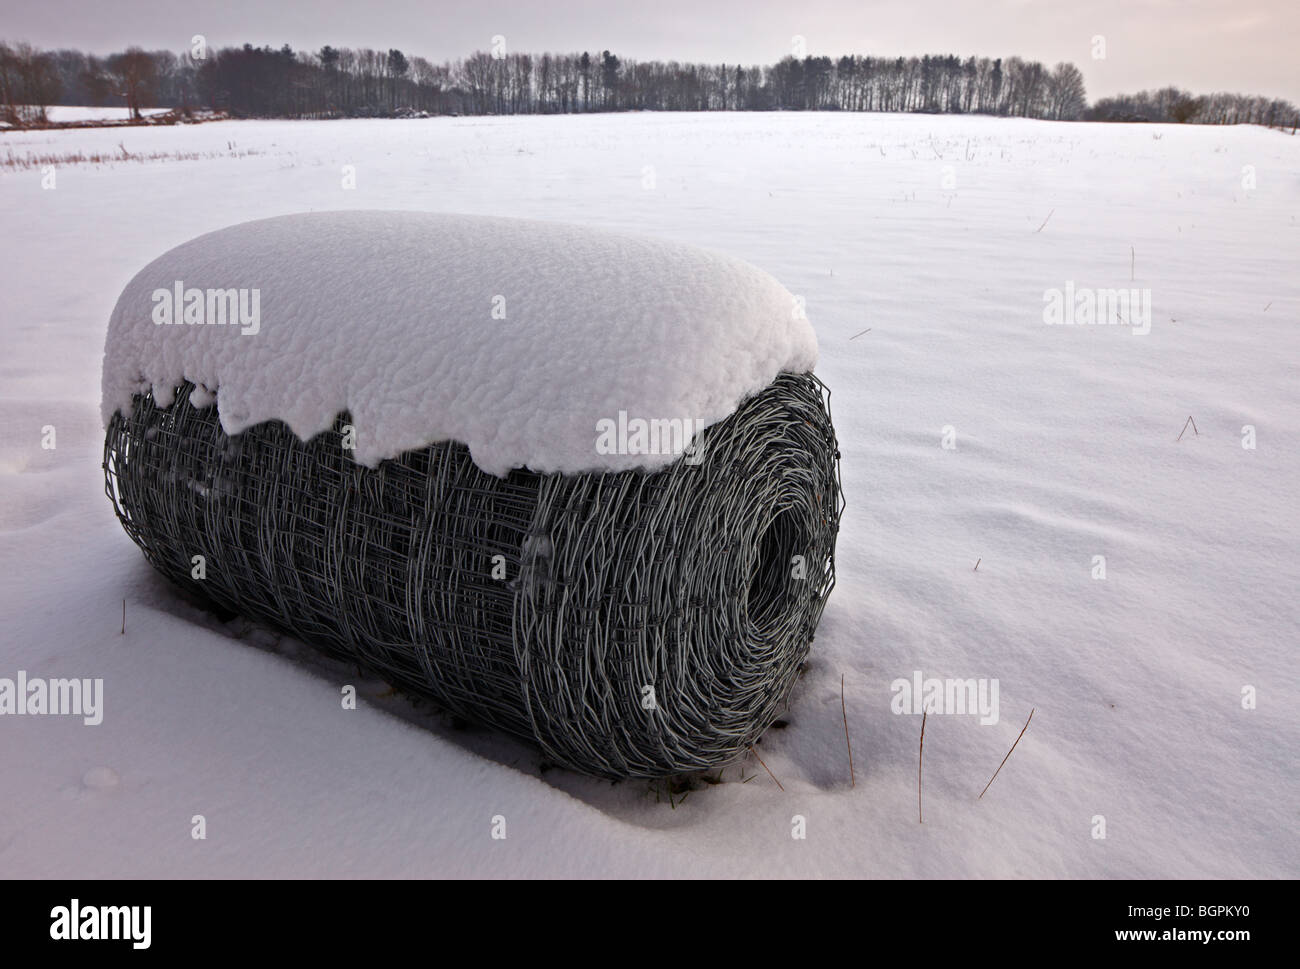 Bale of fencing wire. Stock Photo